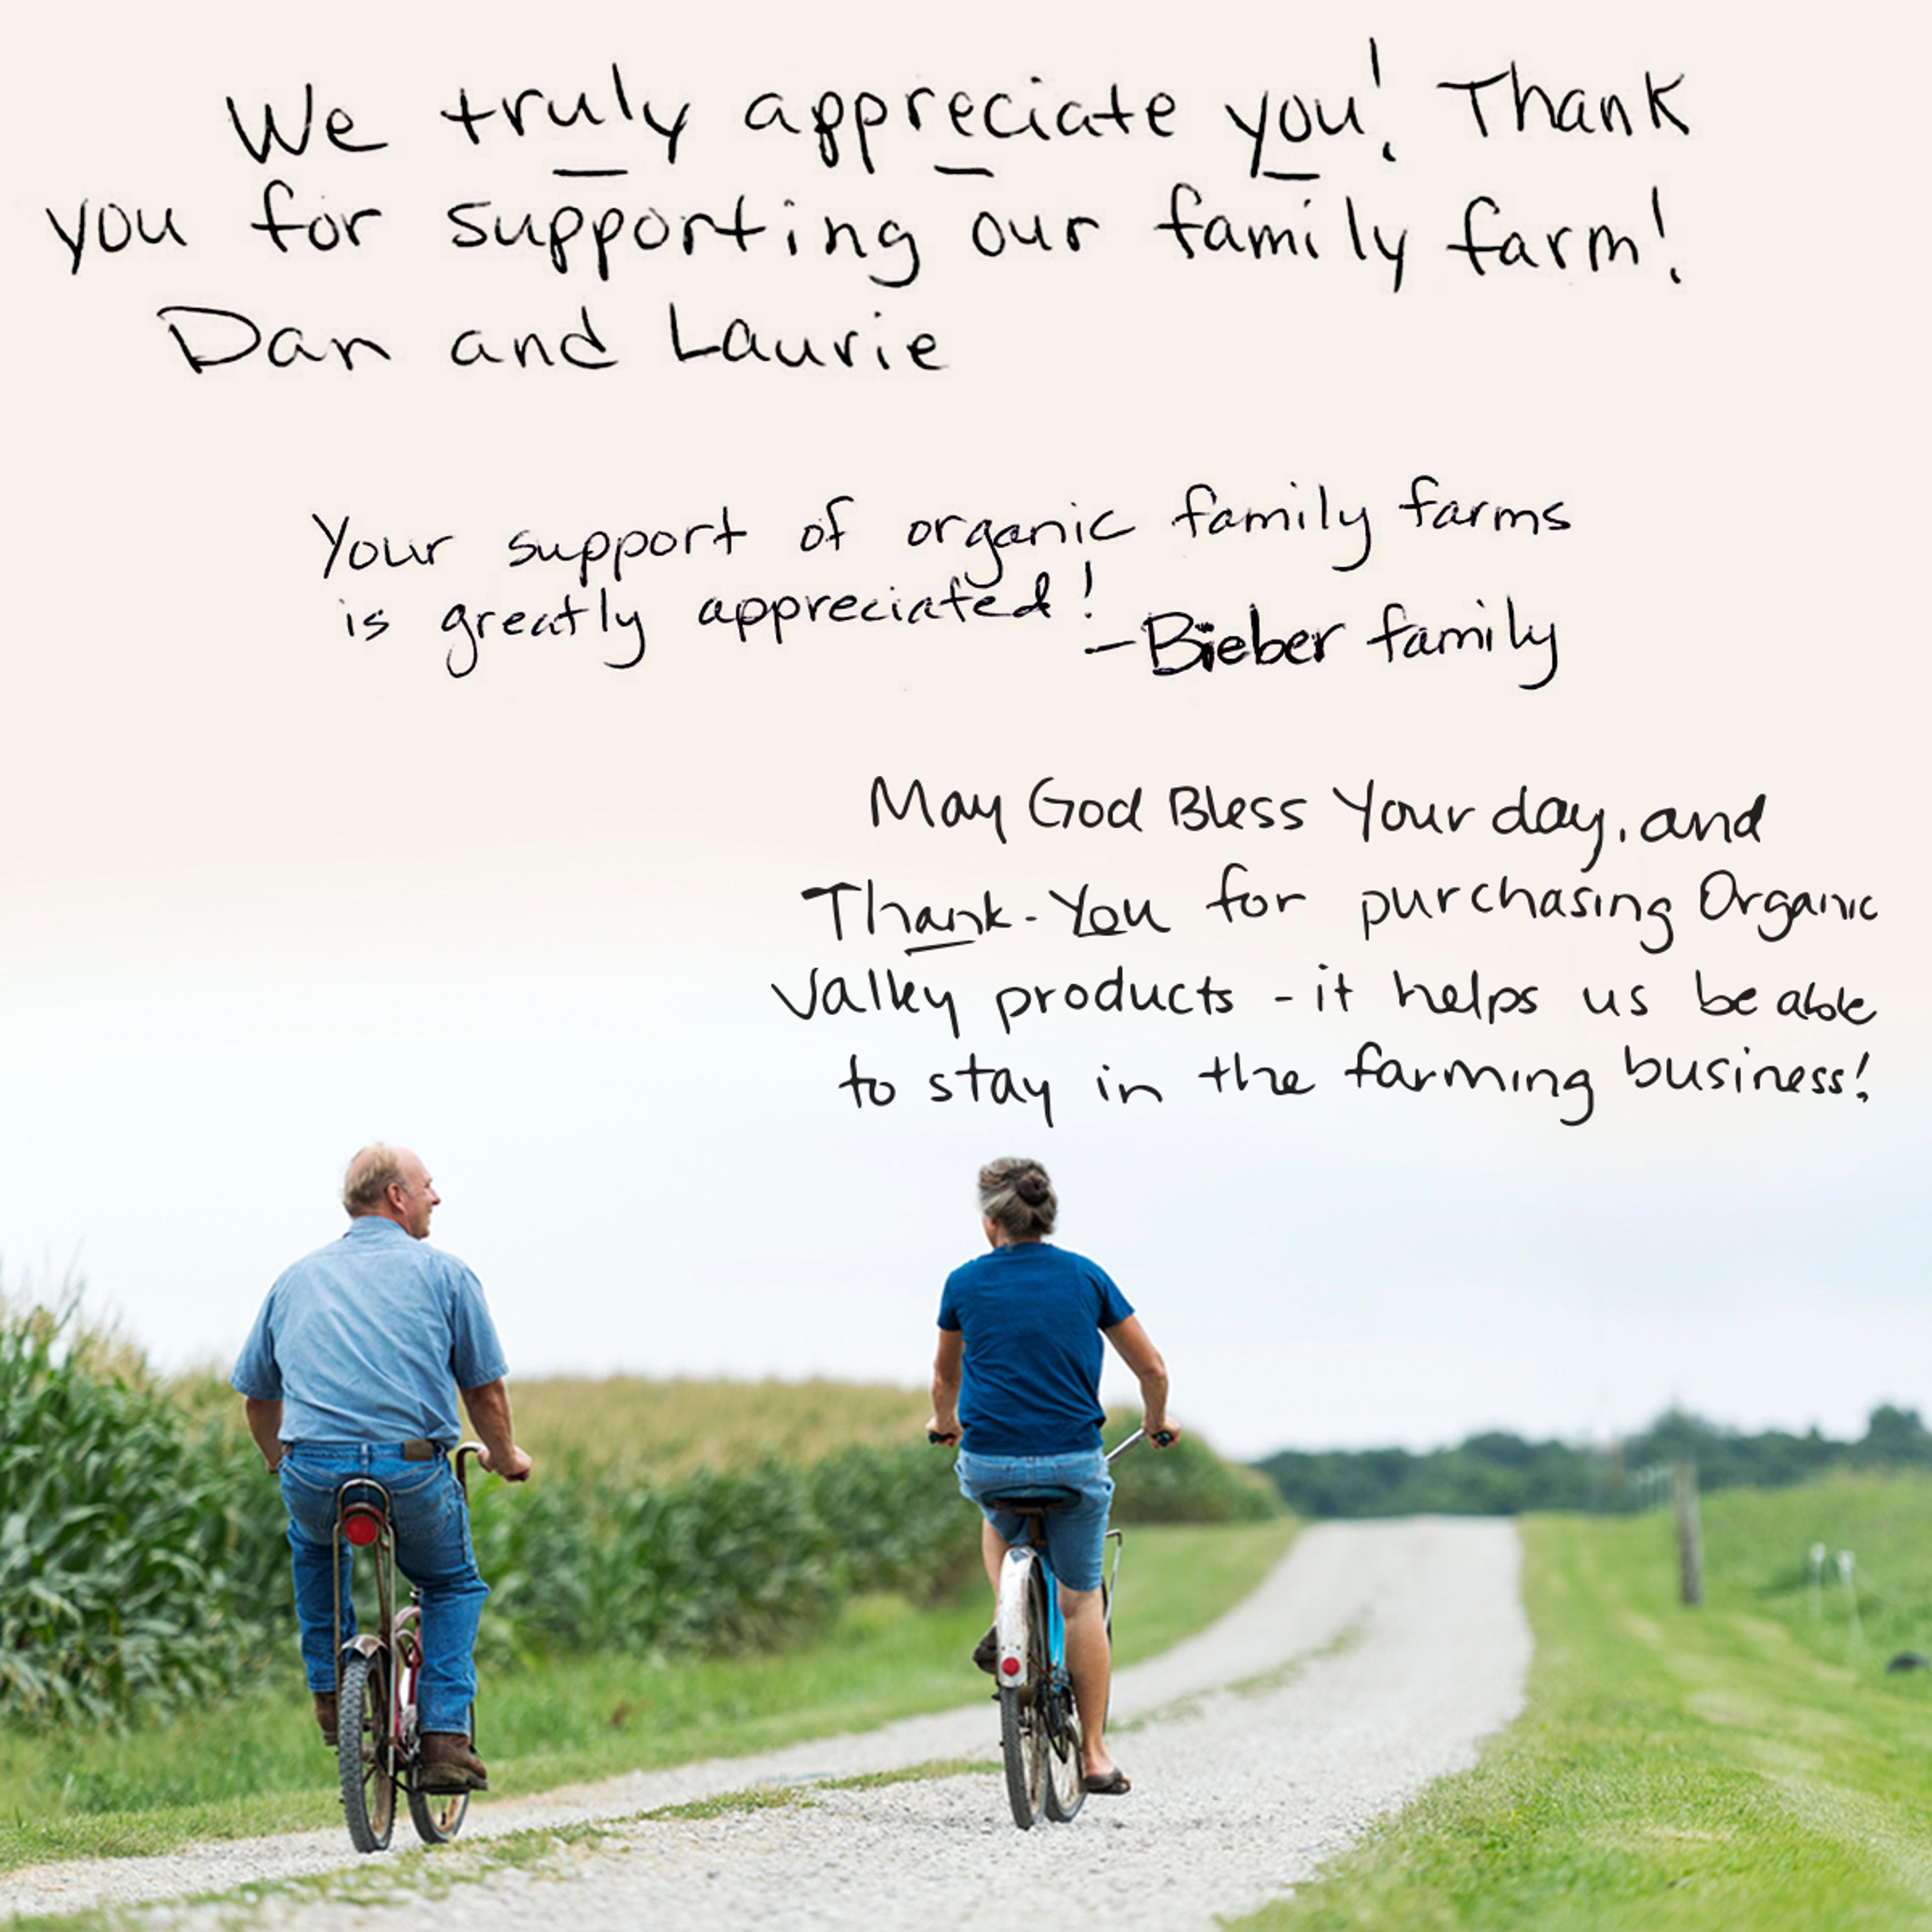 Your support of organic family farms is greatly appreciated.